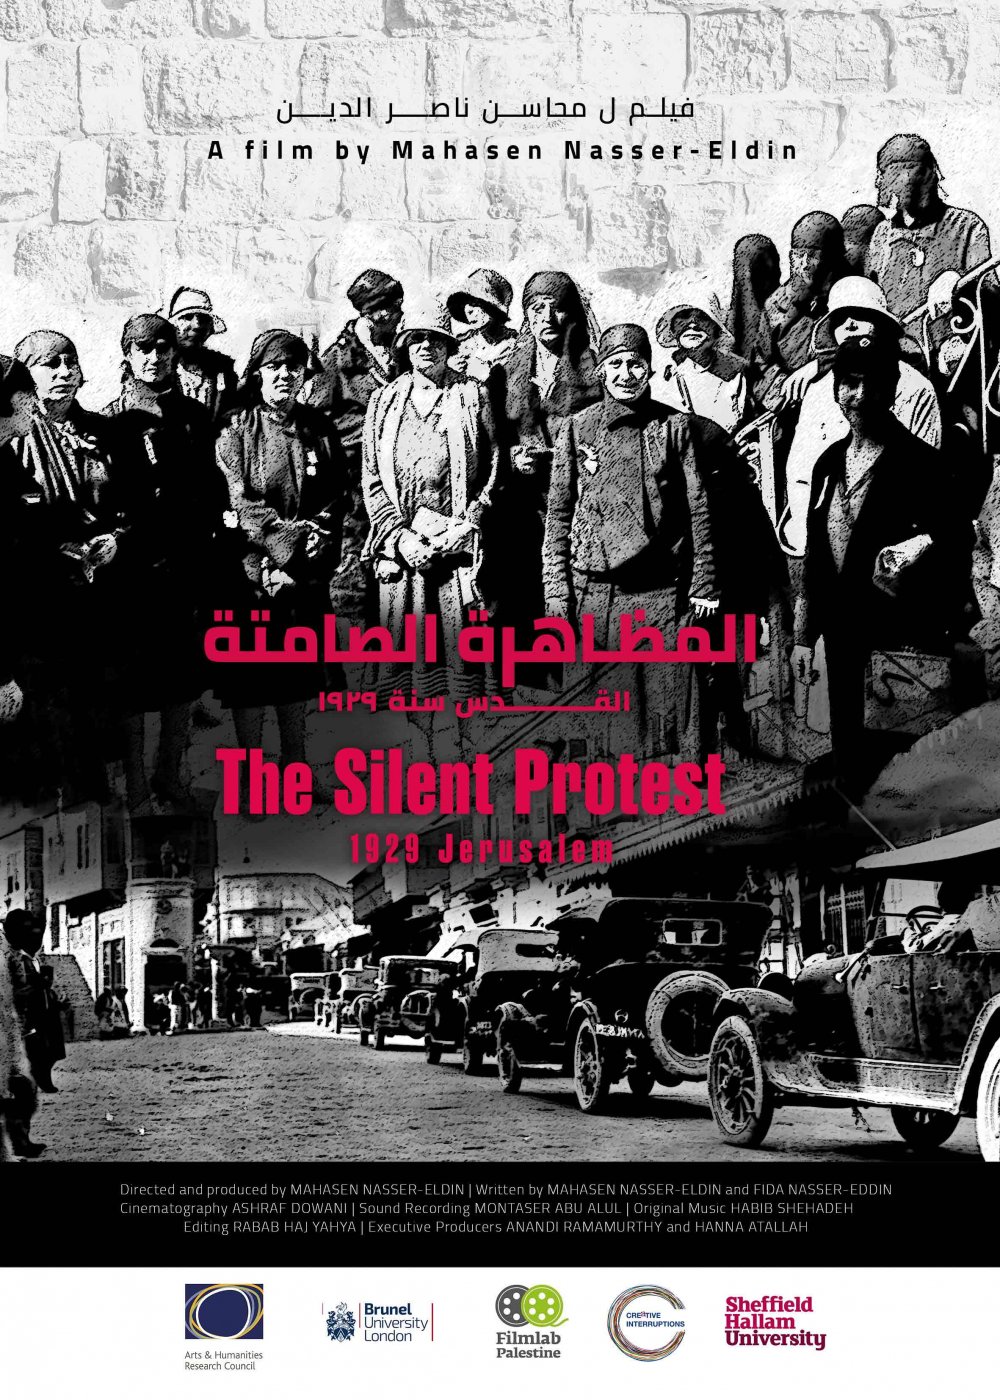 Poster for film "The Silent Protest" by Mahasen Nasser-Eldin, about the archival photo of women demonstrating in Jerusalem